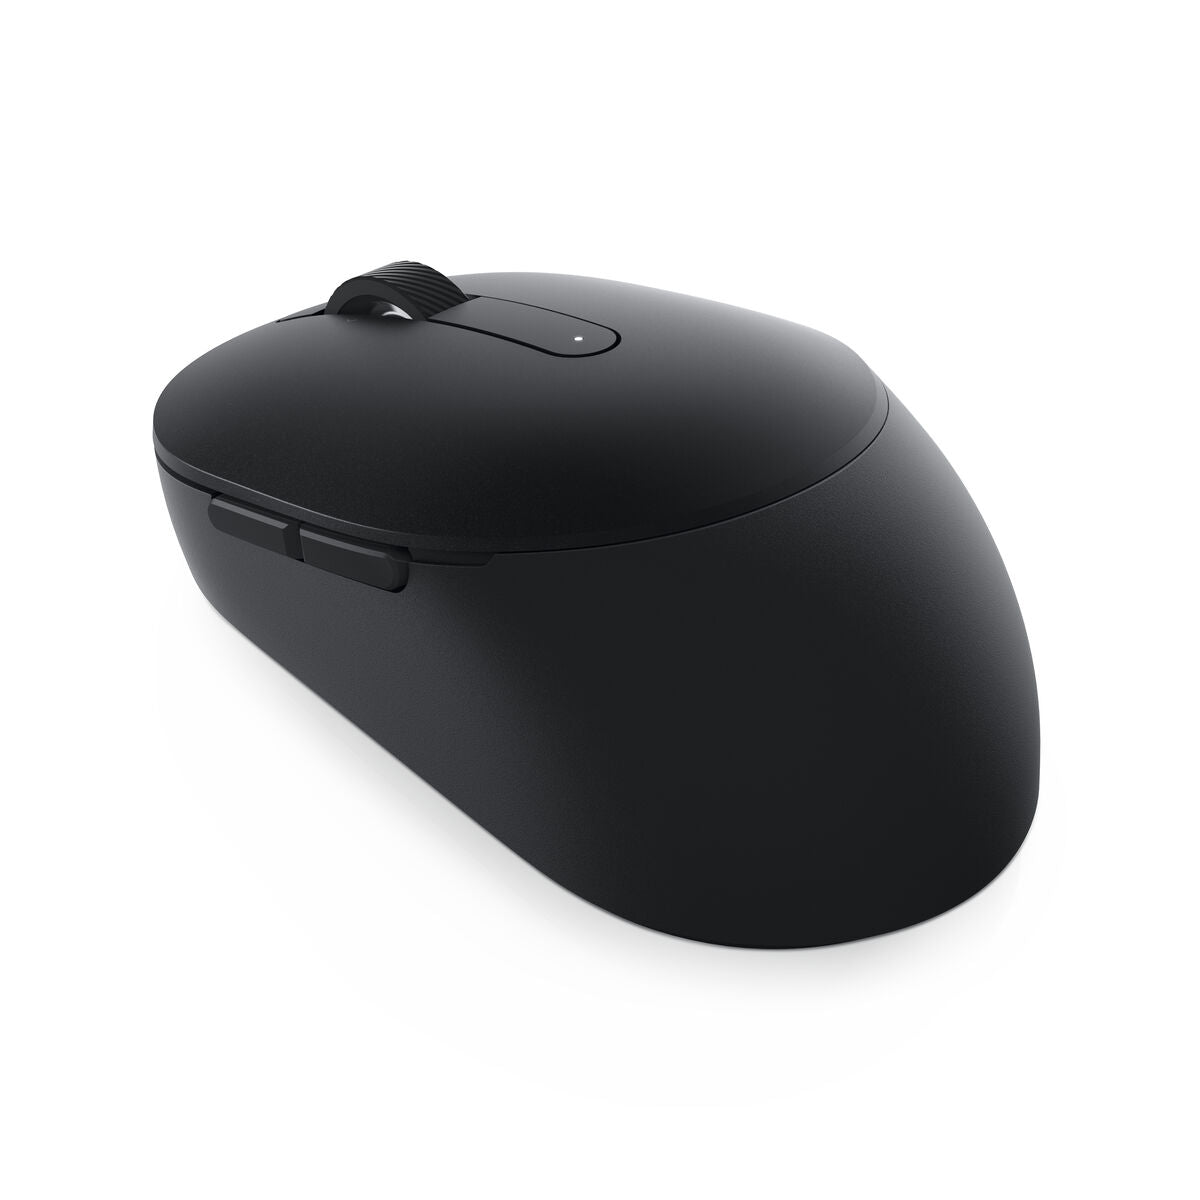 Wireless Mouse Dell MS5120W-BLK Black, Dell, Computing, Accessories, wireless-mouse-dell-ms5120w-blk-black, Brand_Dell, category-reference-2609, category-reference-2642, category-reference-2656, category-reference-t-19685, category-reference-t-19908, category-reference-t-21353, computers / peripherals, Condition_NEW, office, Price_50 - 100, Teleworking, RiotNook